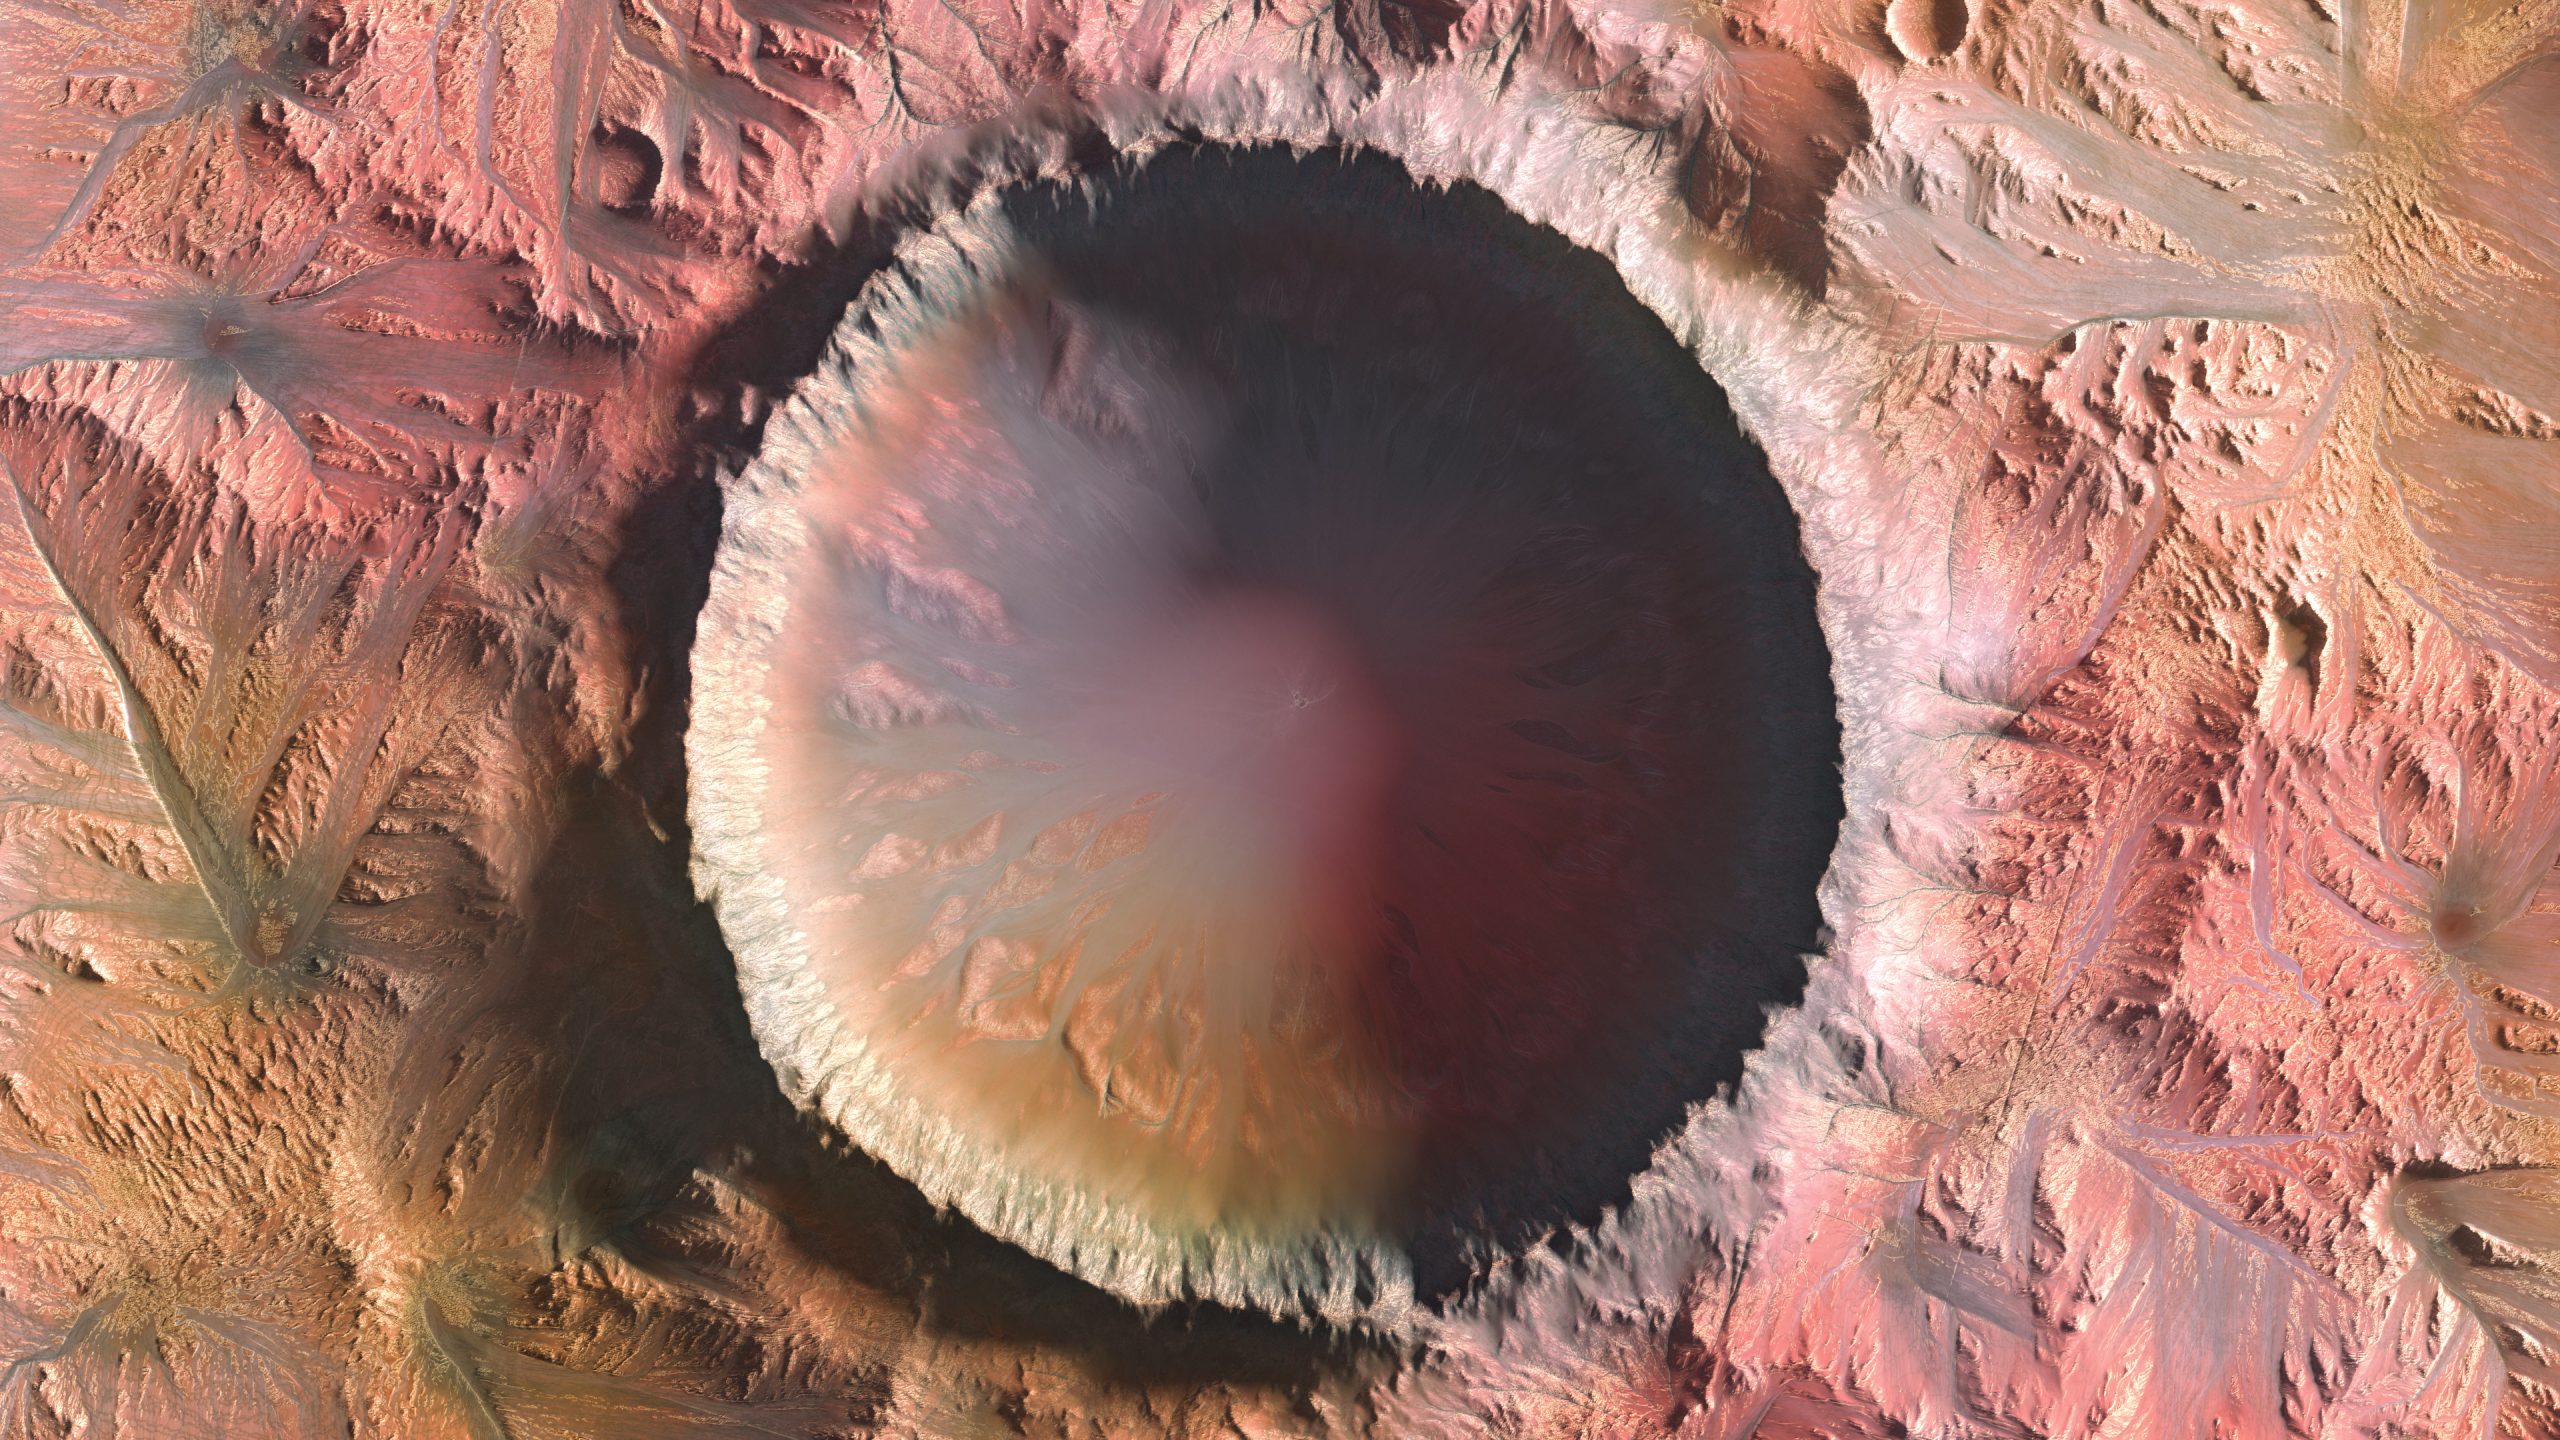 Organic compounds on Mars.  NASA's Exciting Discovery at Jezero Crater